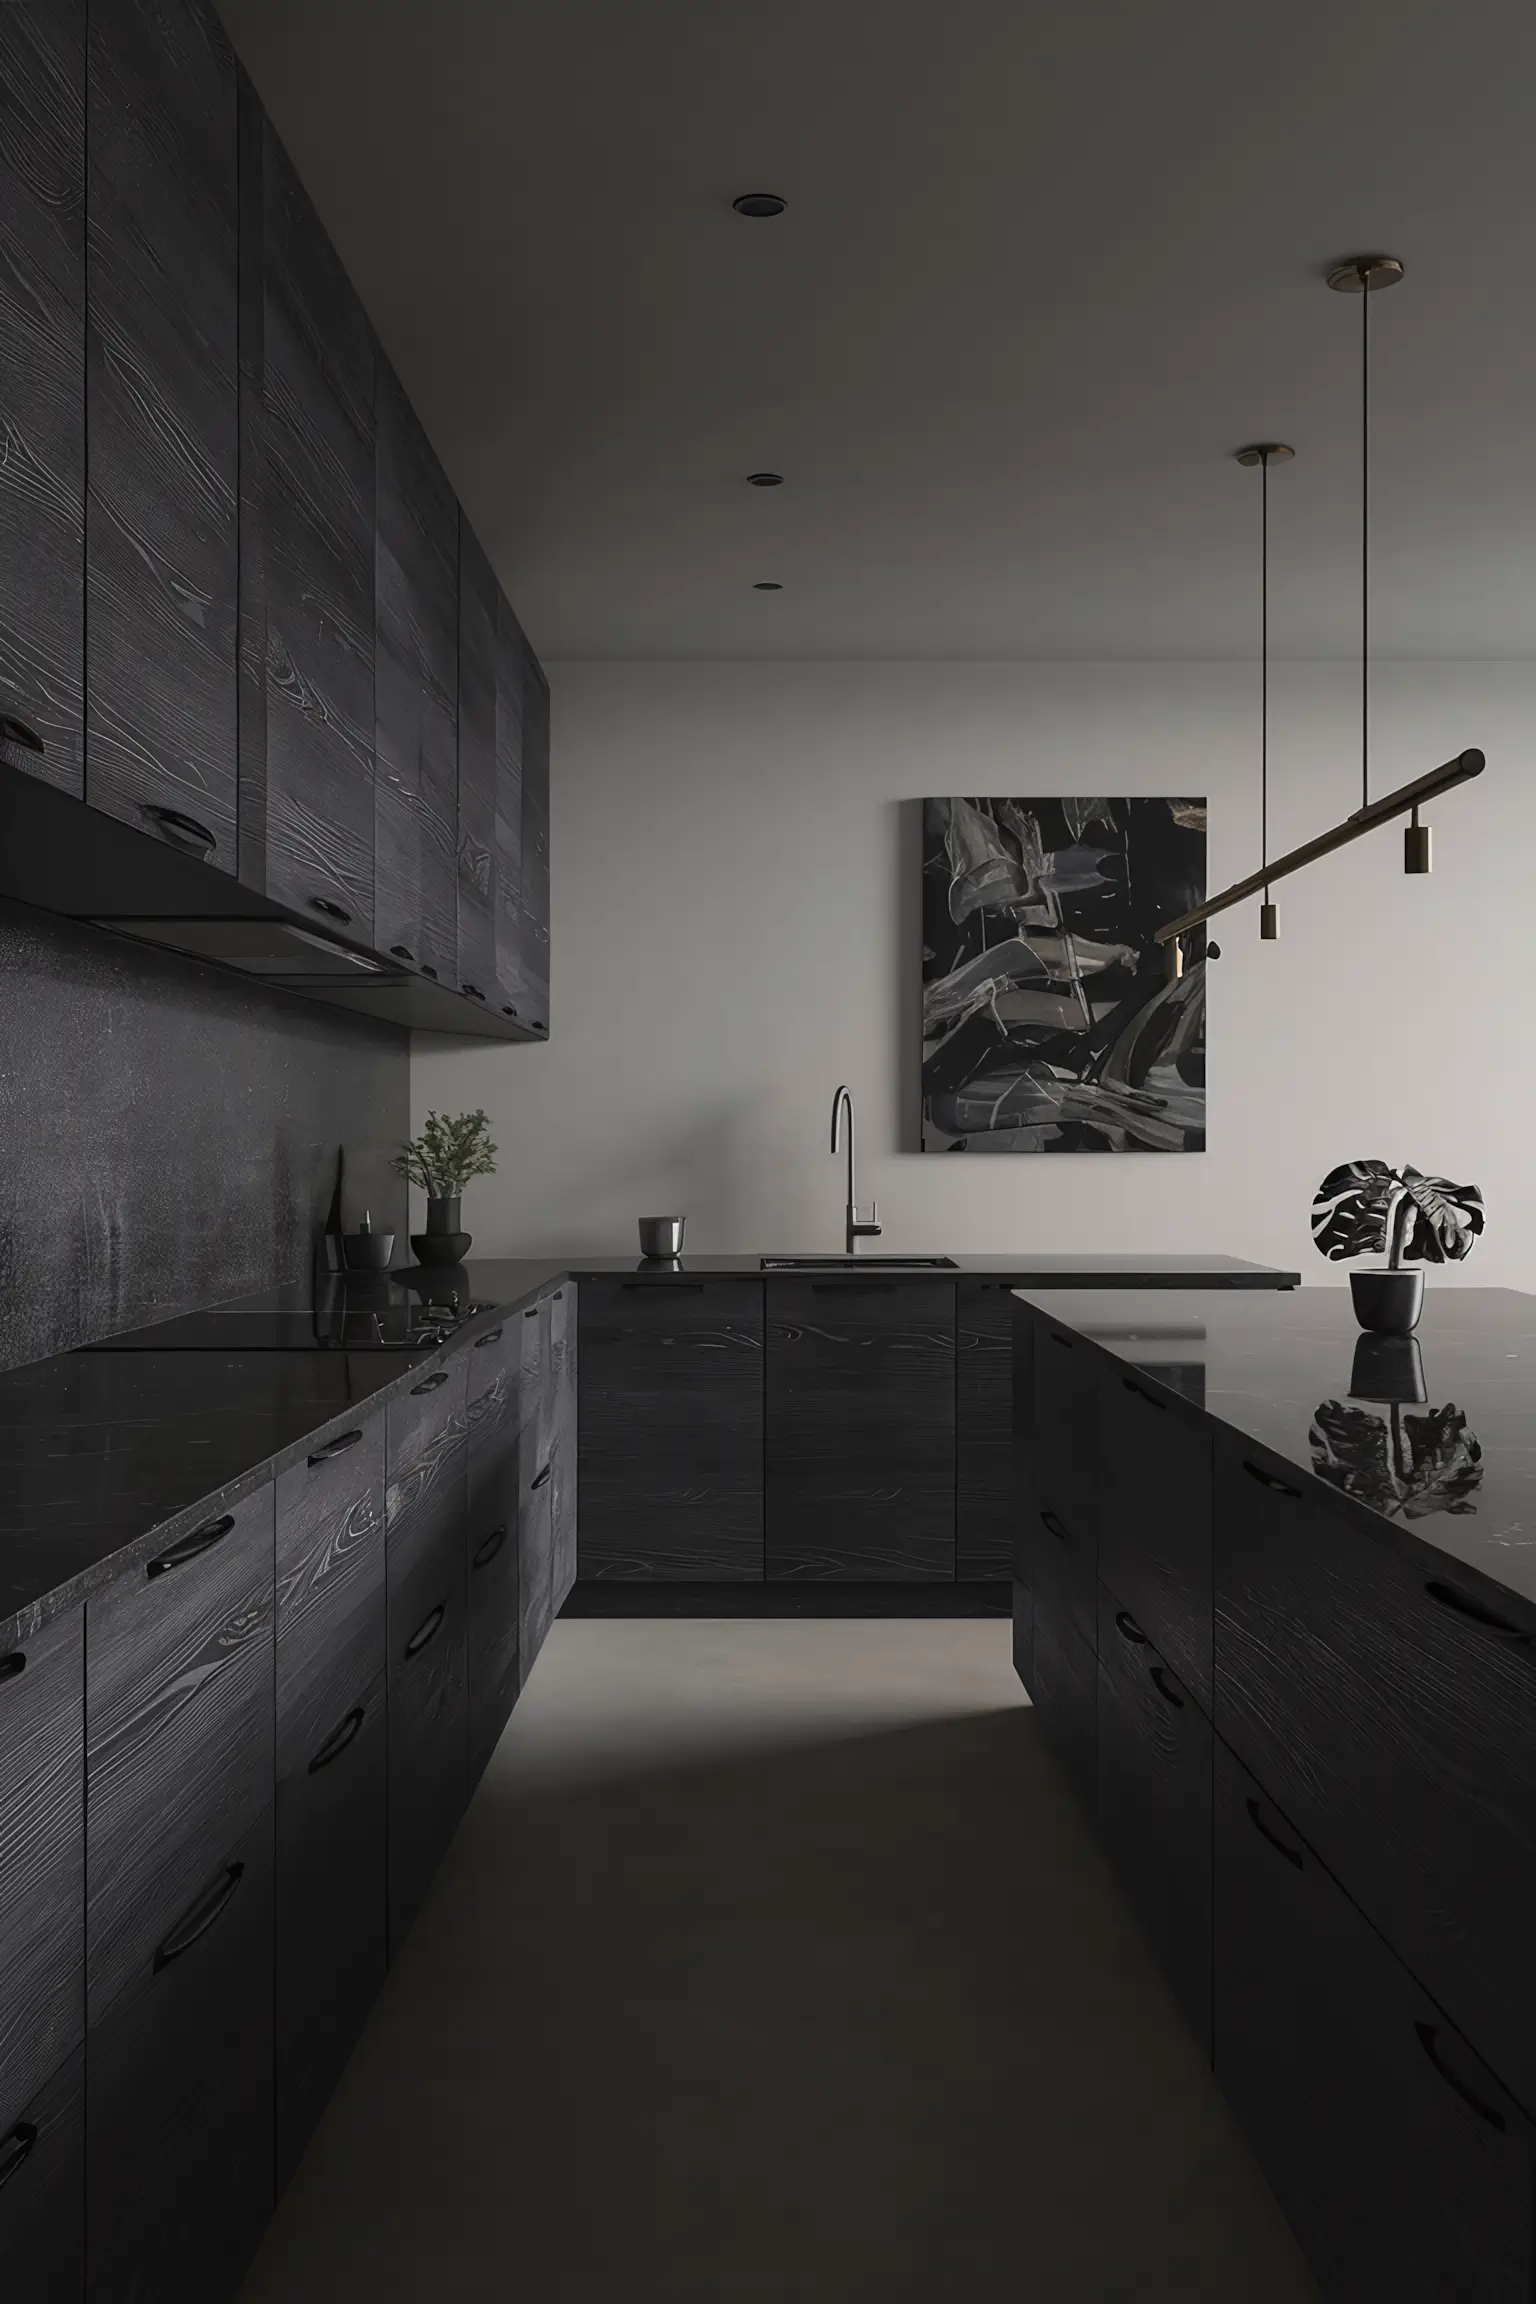 Elegant black kitchen with sleek cabinetry and polished countertops.